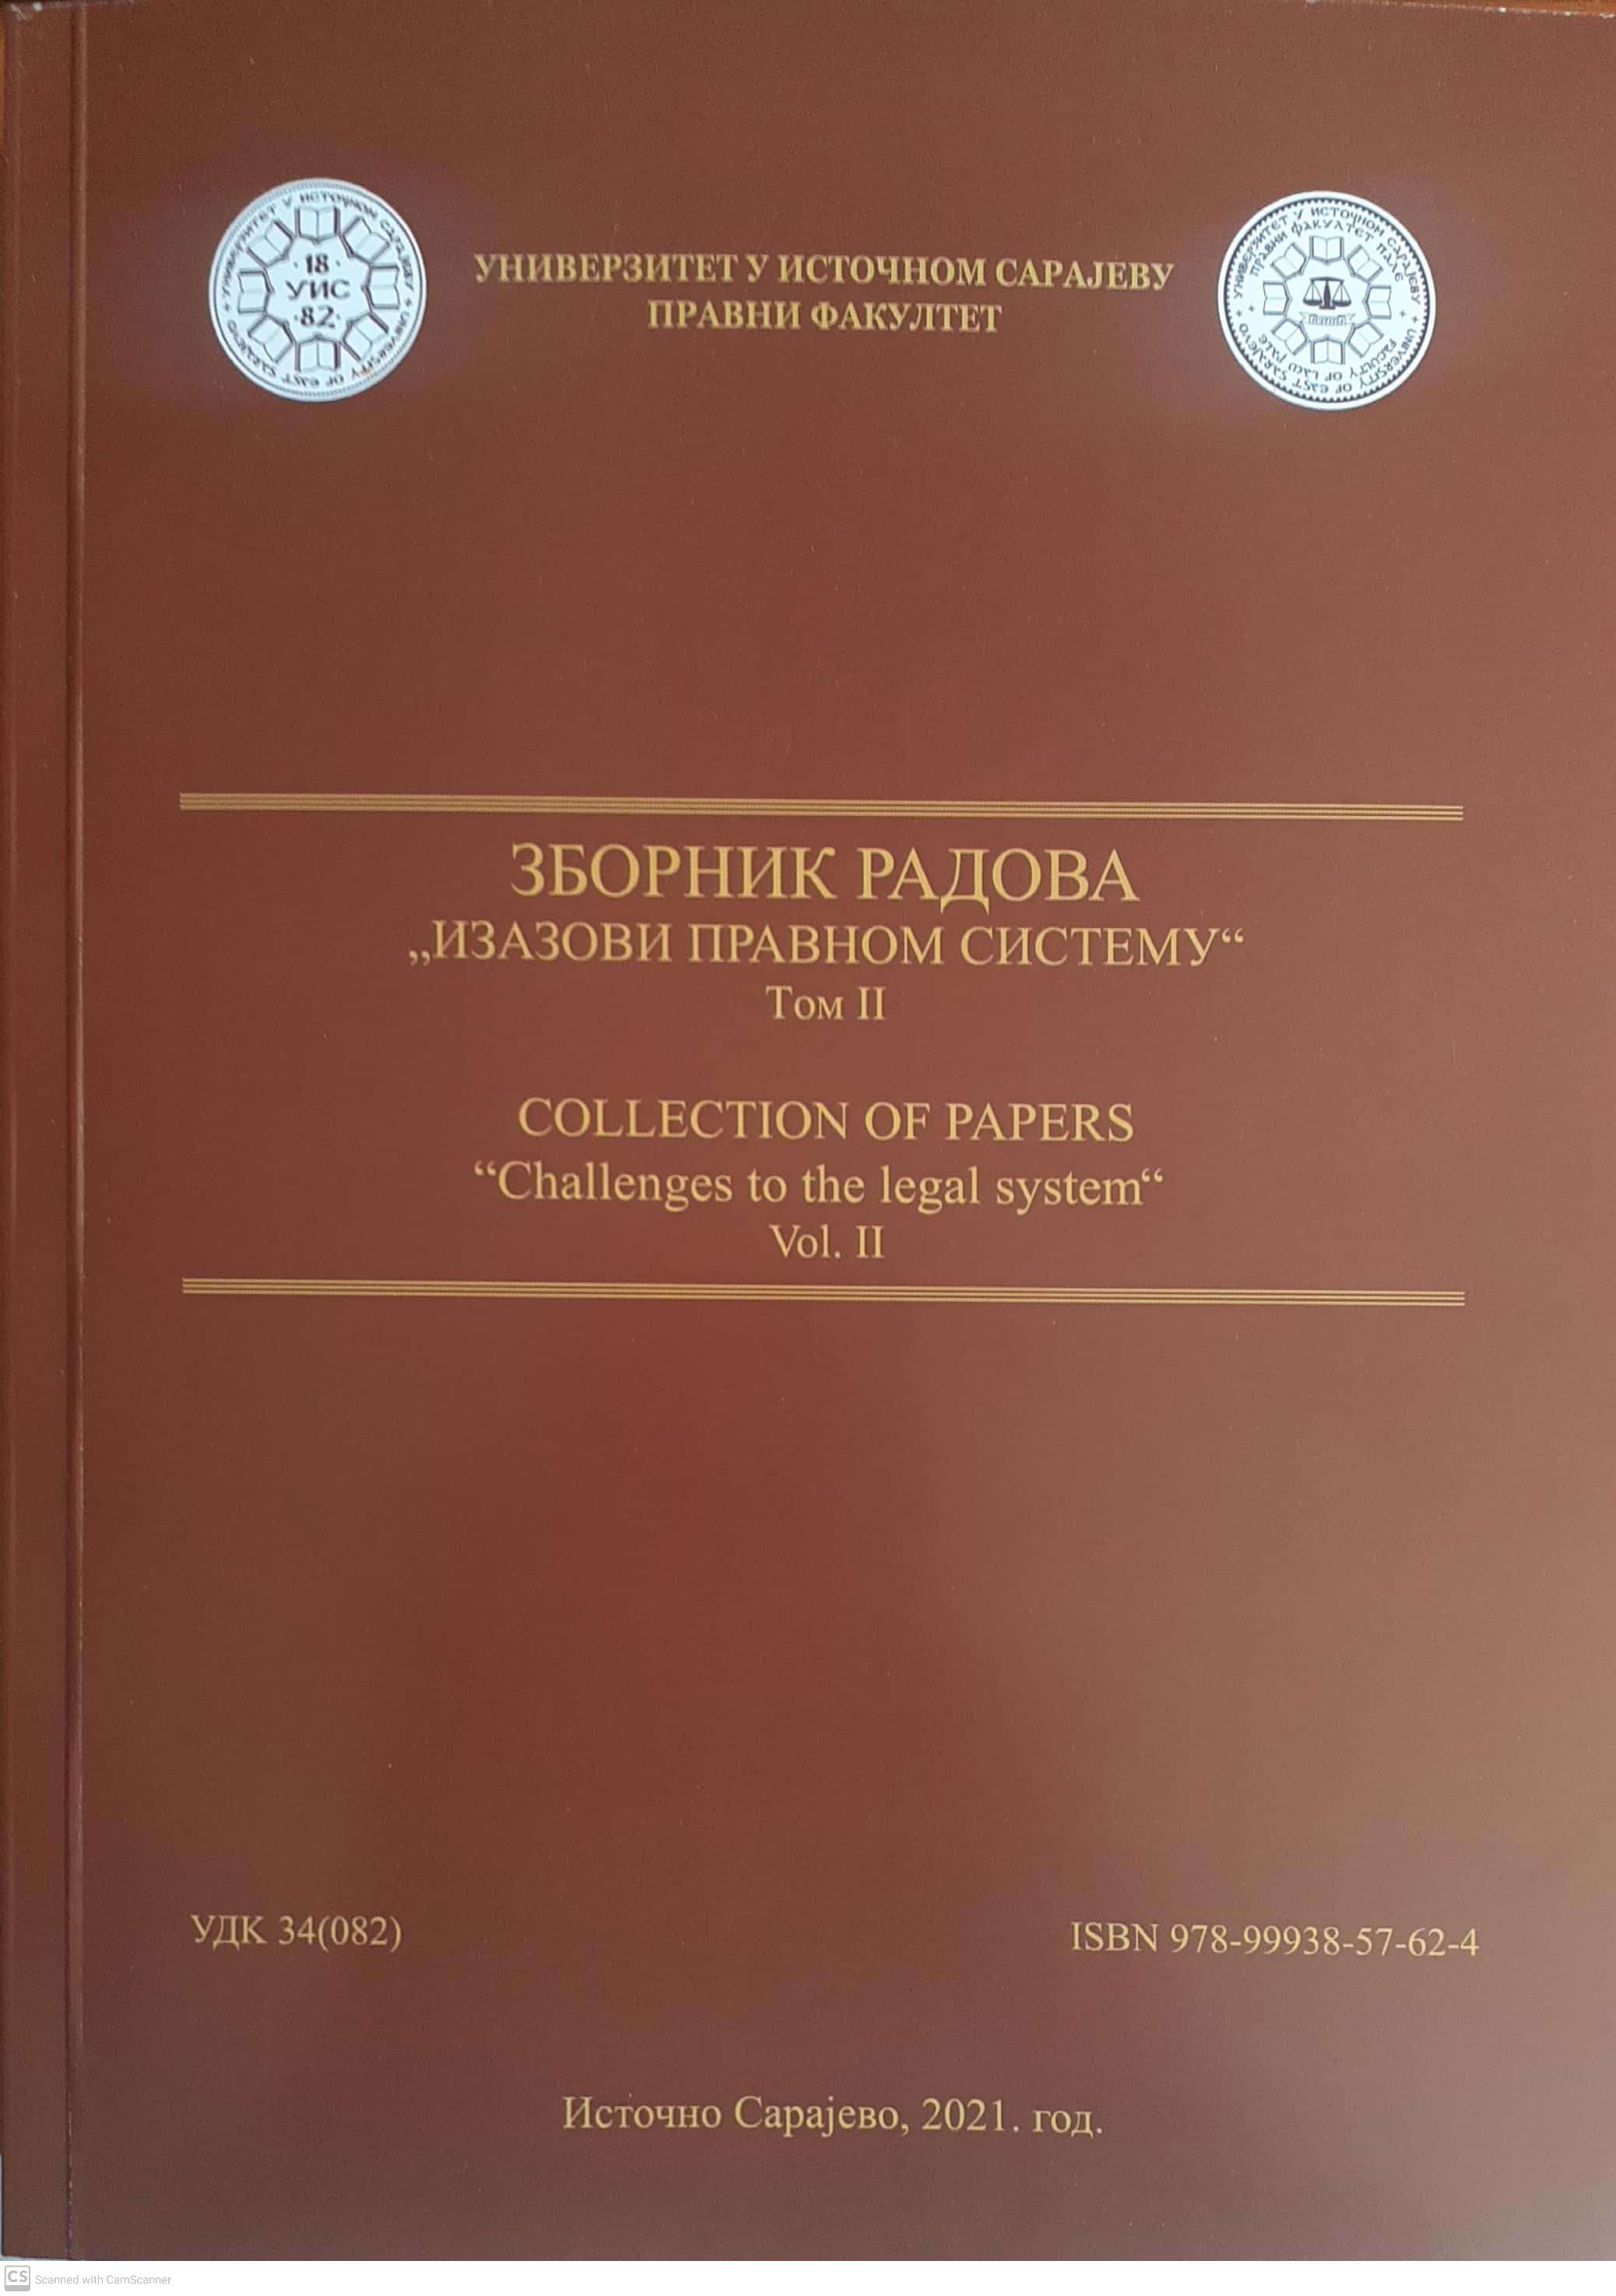 Collection of papers "Challenges to the Legal System" Vol II